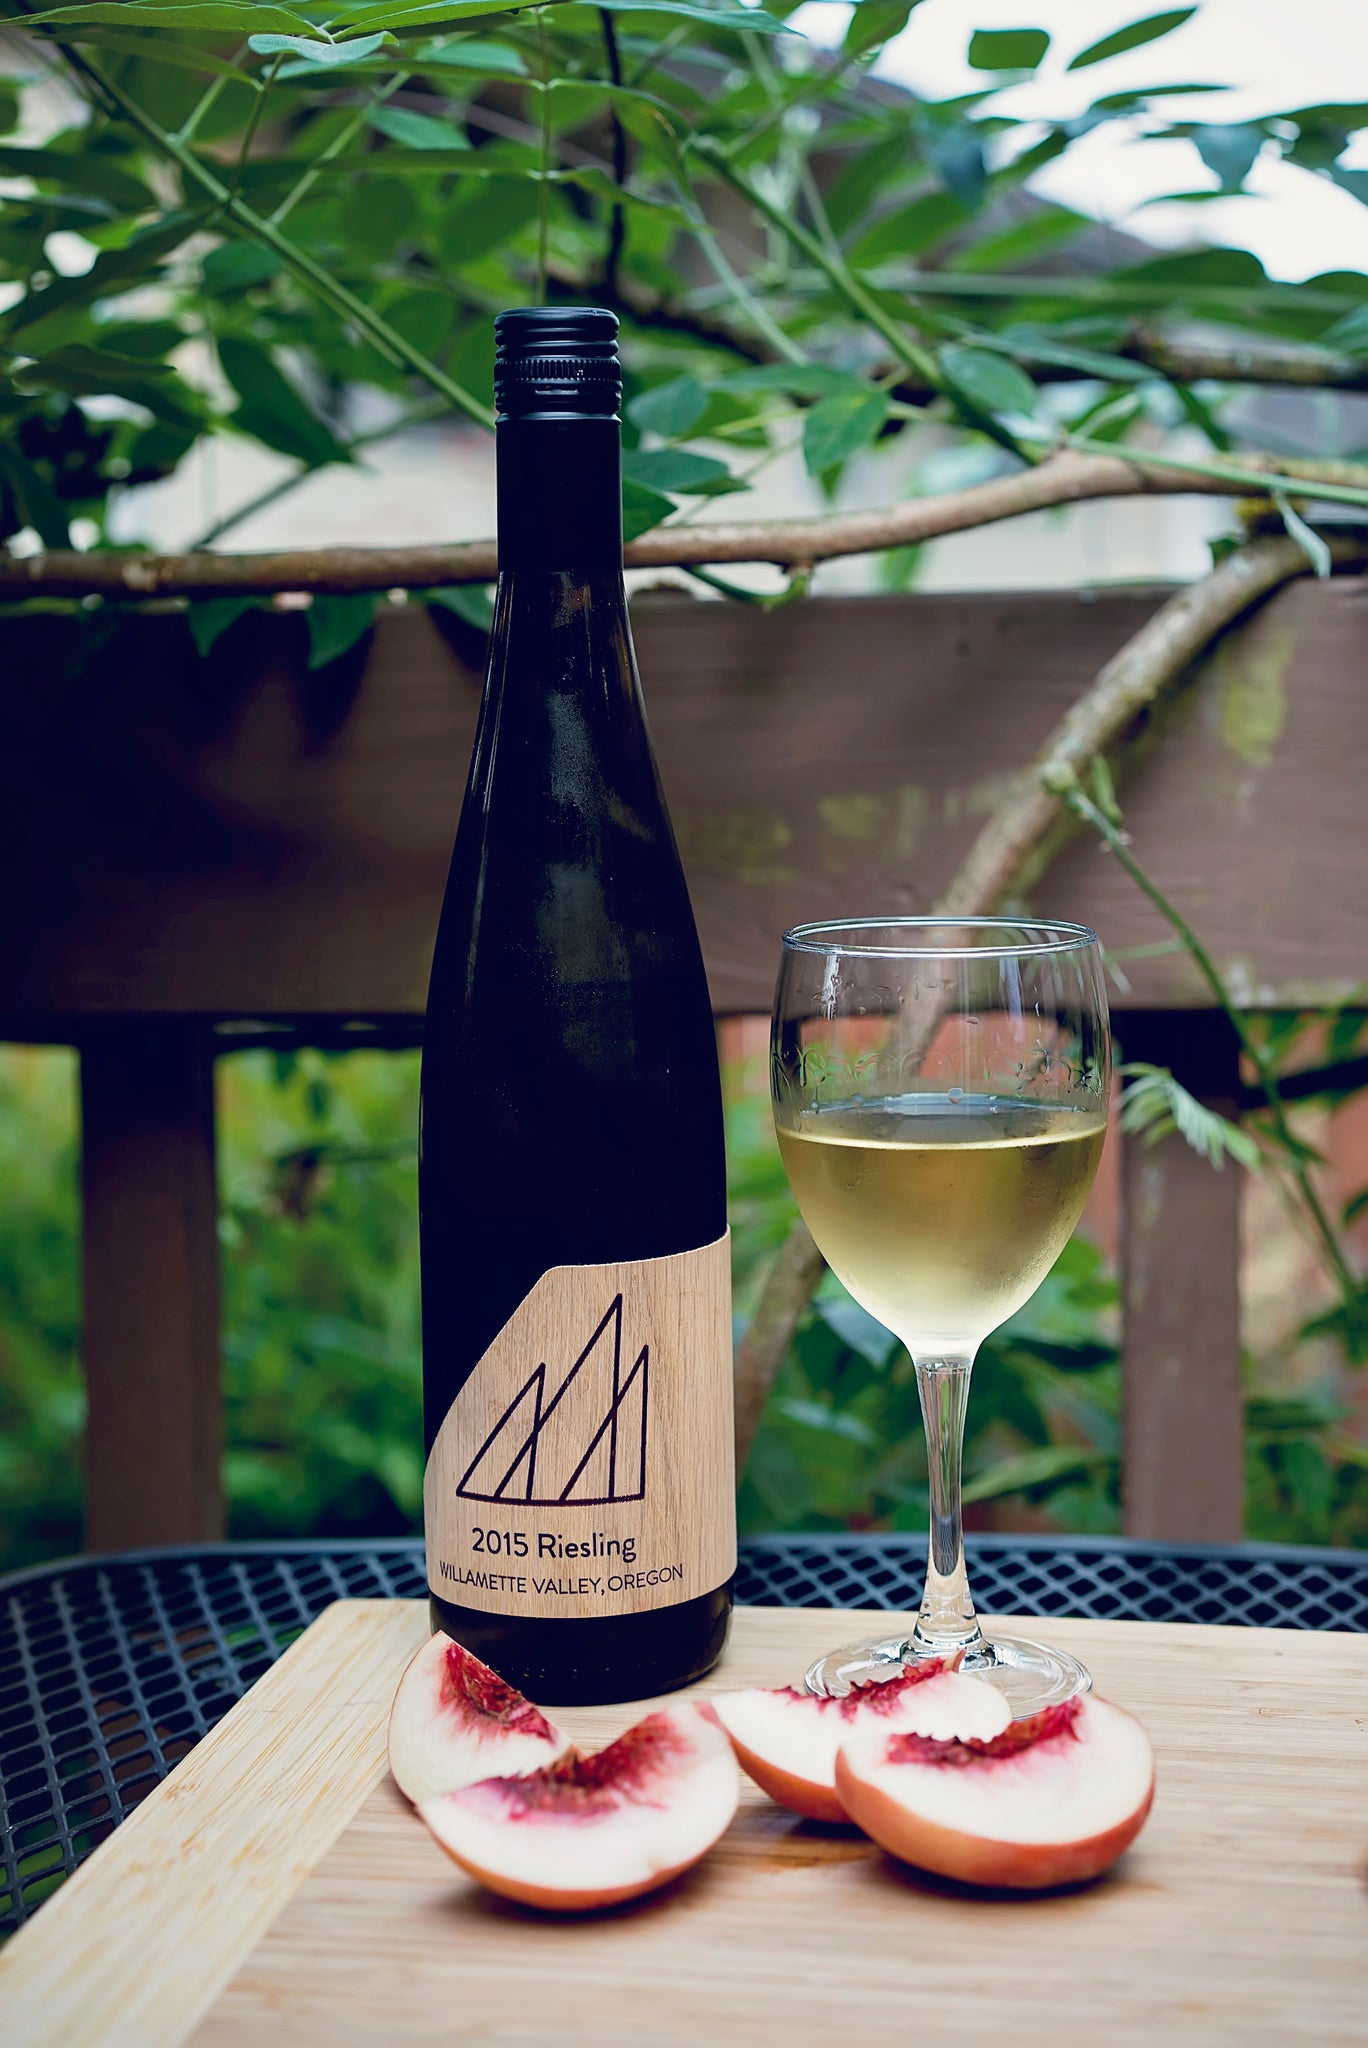 Riesling, grilled peaches and turkey burgers ... yes, please!